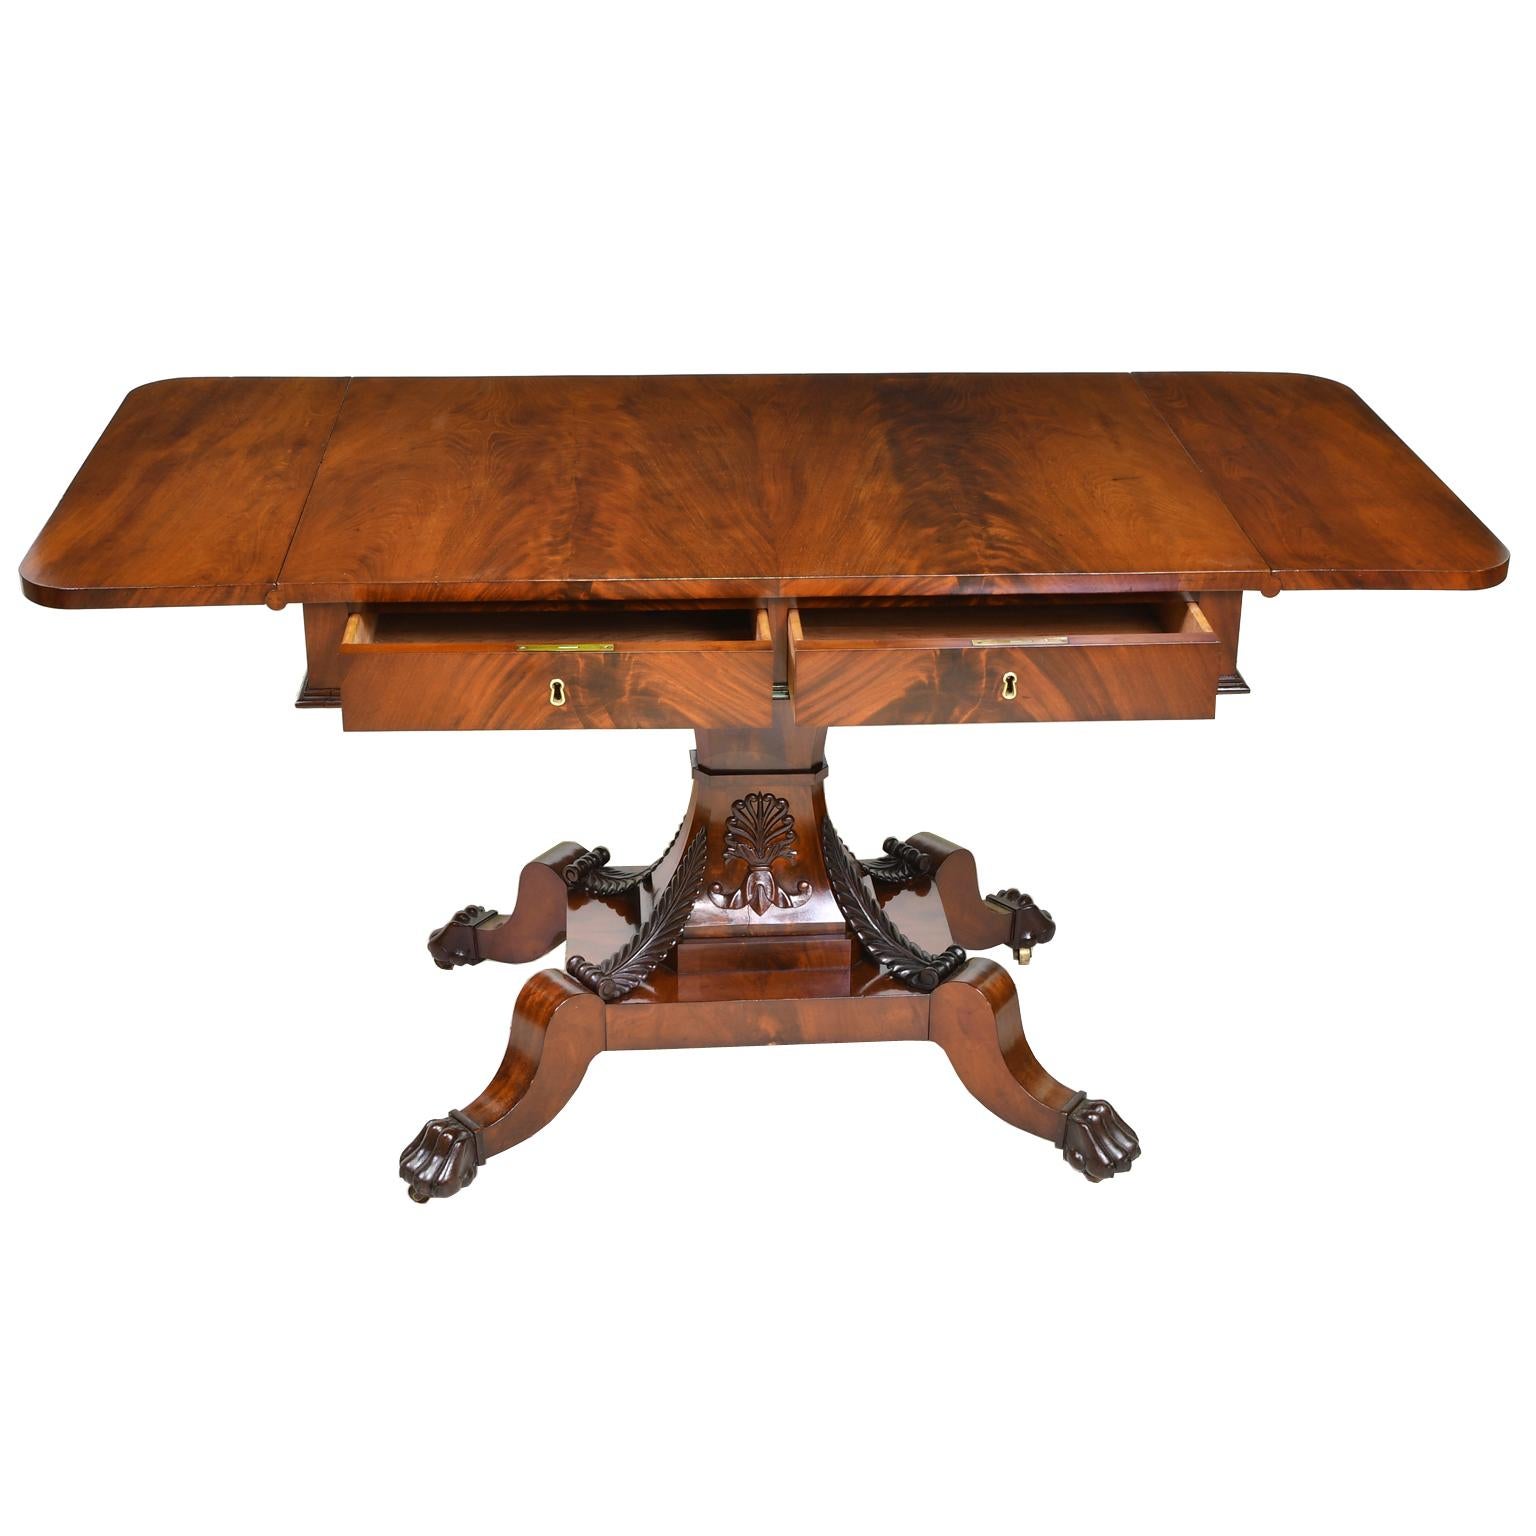  Swedish Karl Johan Salon/Sofa Table or Desk in West Indies Mahogany, c. 1825 In Good Condition For Sale In Miami, FL